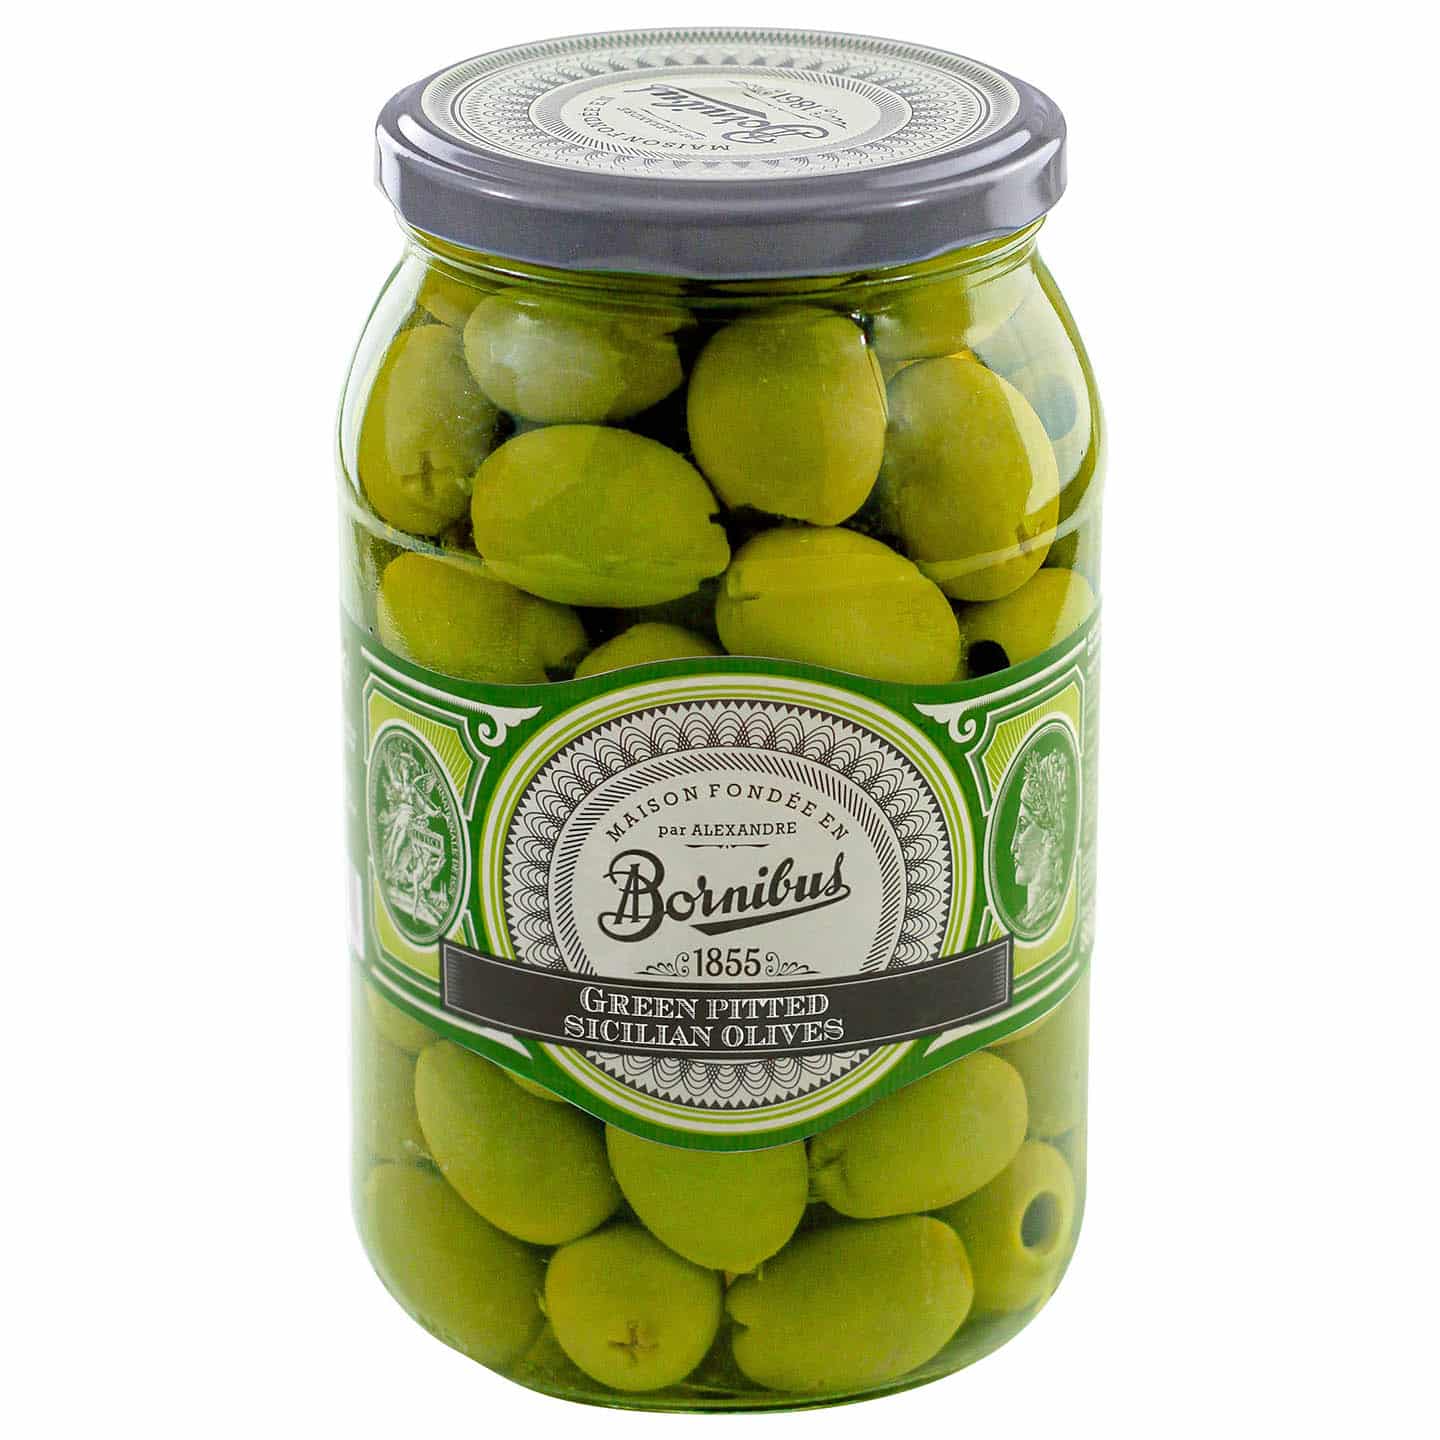 BS1604---Green-pitted-sicilian-olives